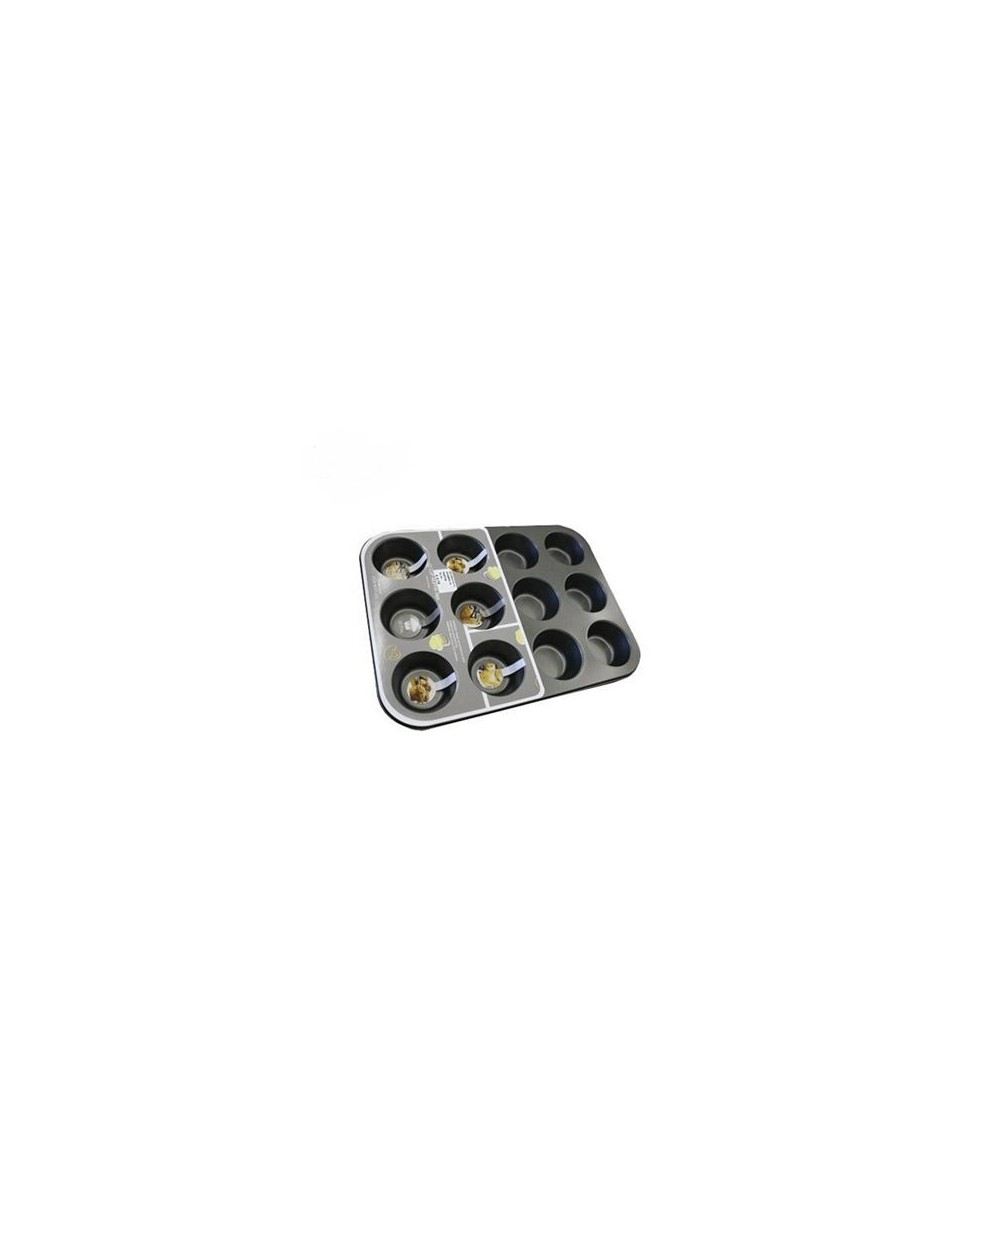 FORMINA STAMPO 12 MUFFIN 35x26x3cm.  A185775